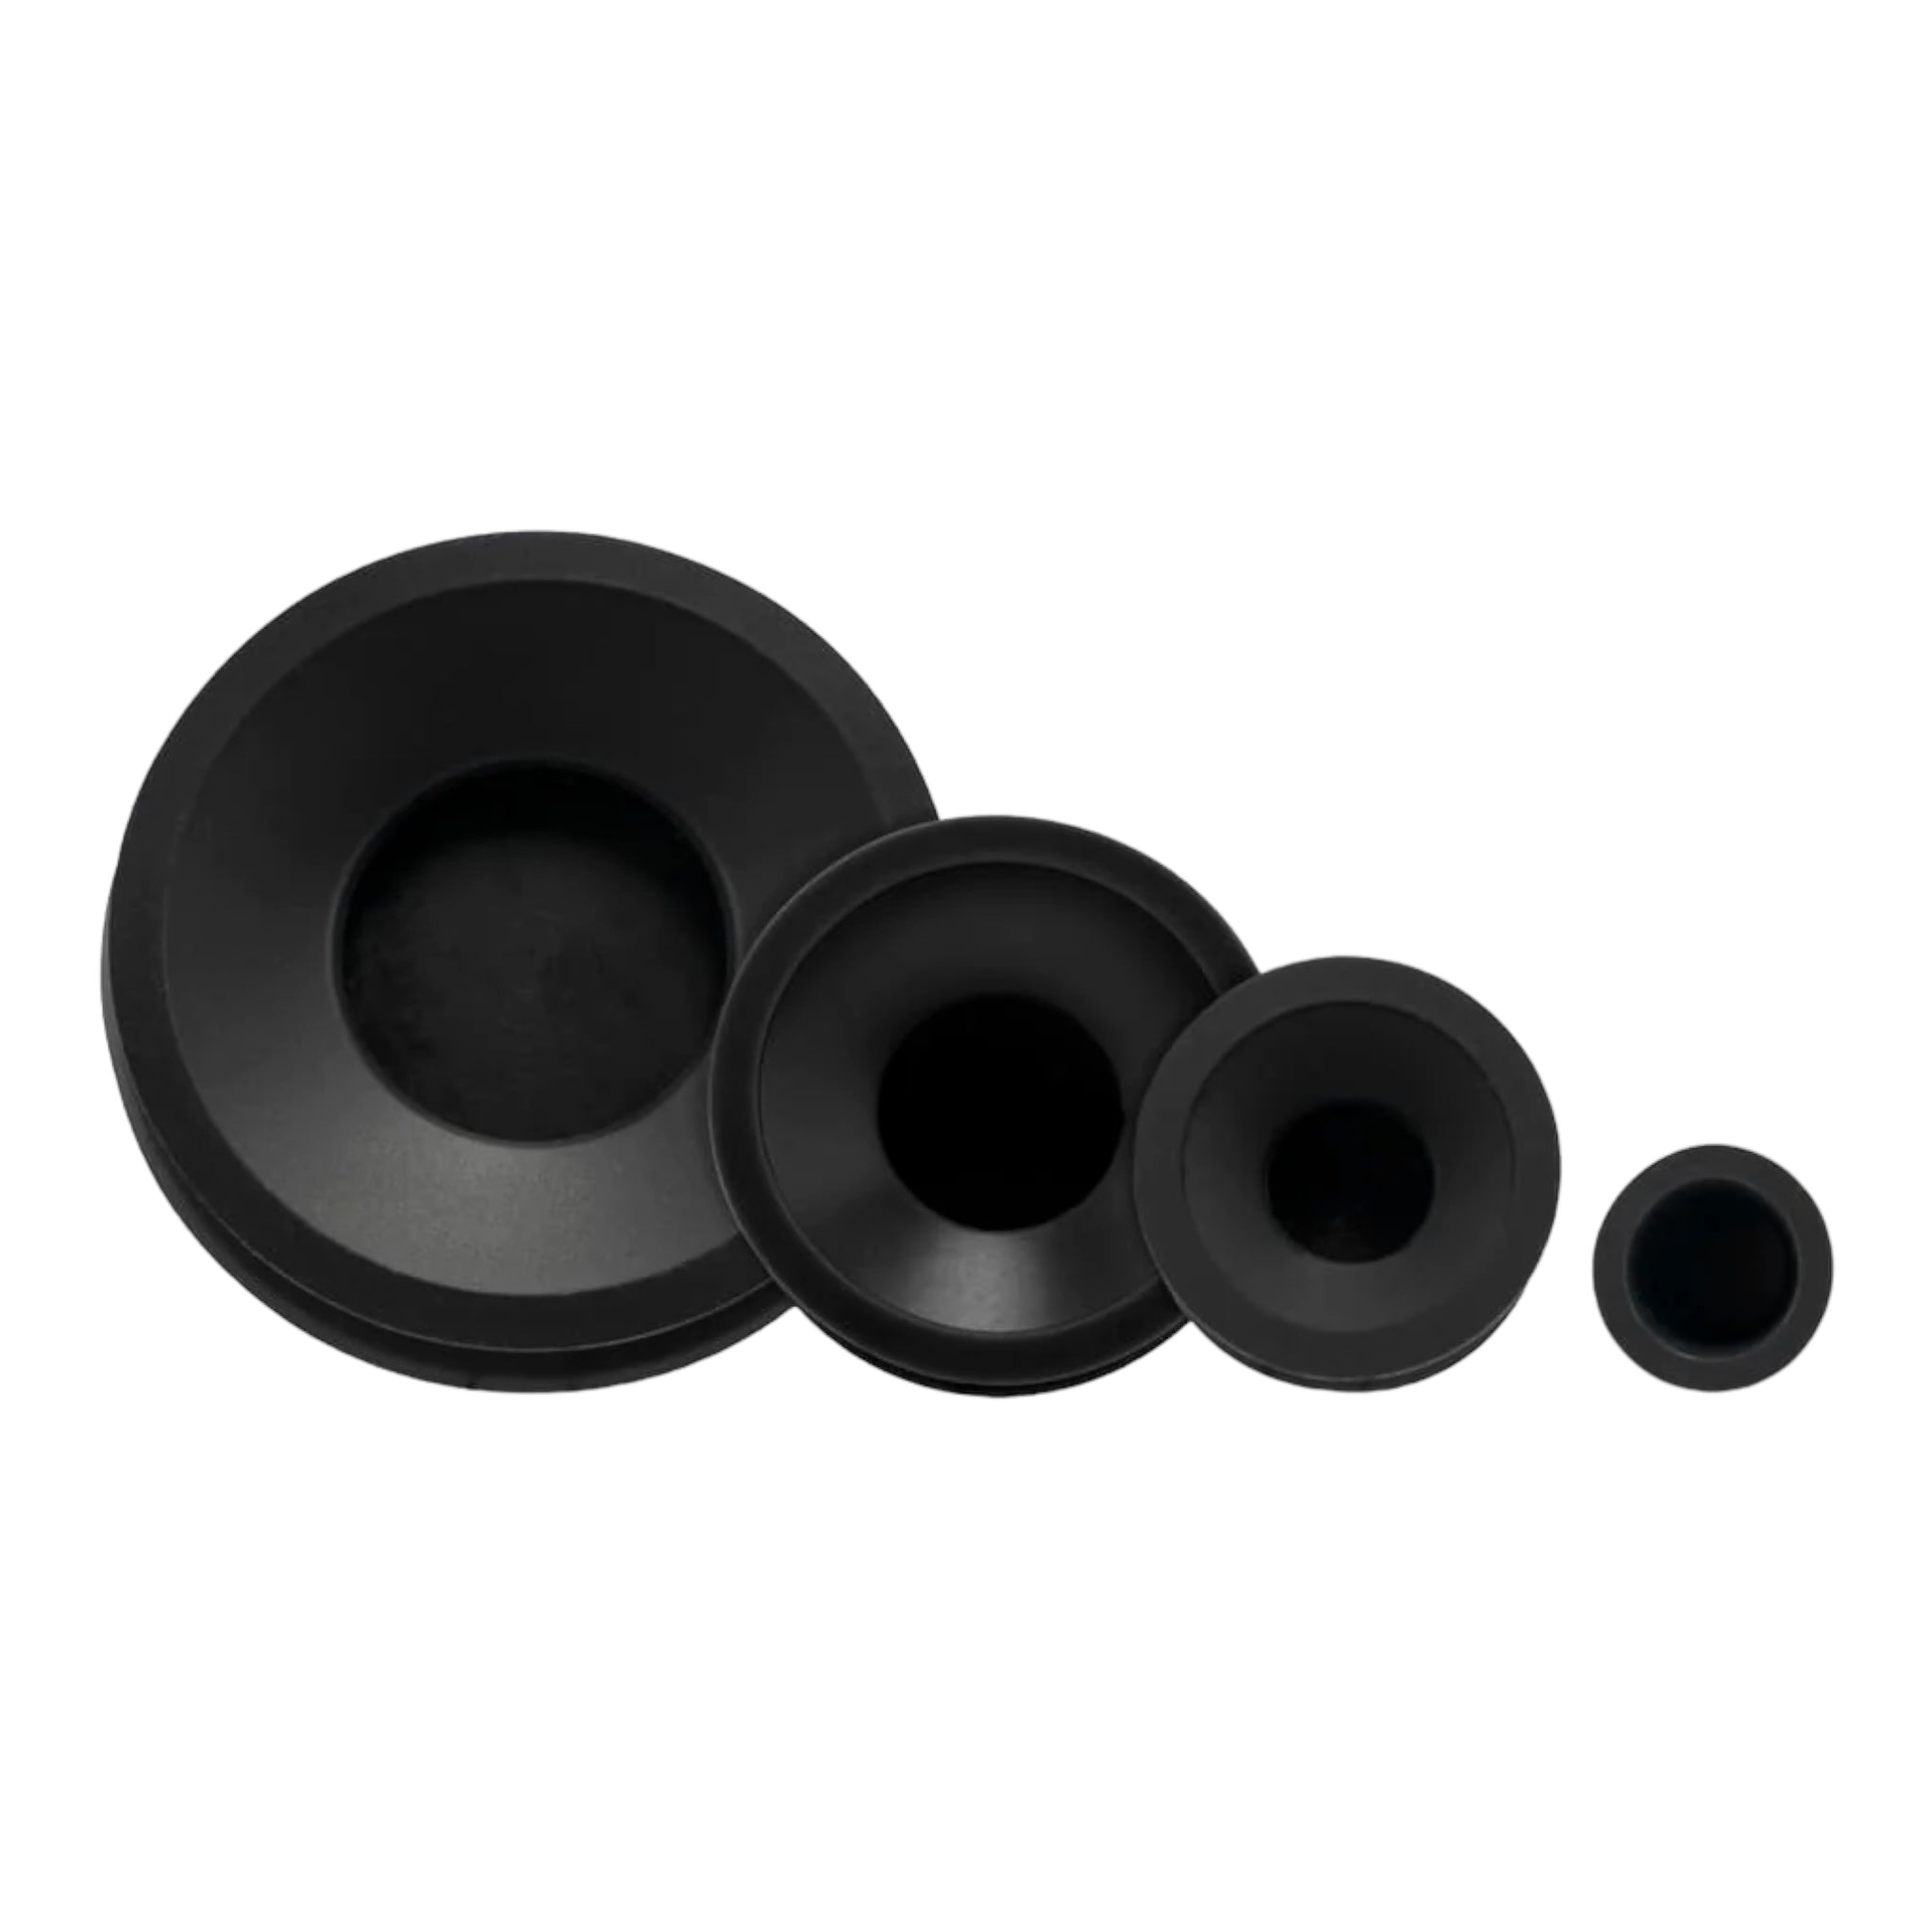 Black Ooze Resolution Silicone Res Caps For Cleaning Bongs And Dab Rigs